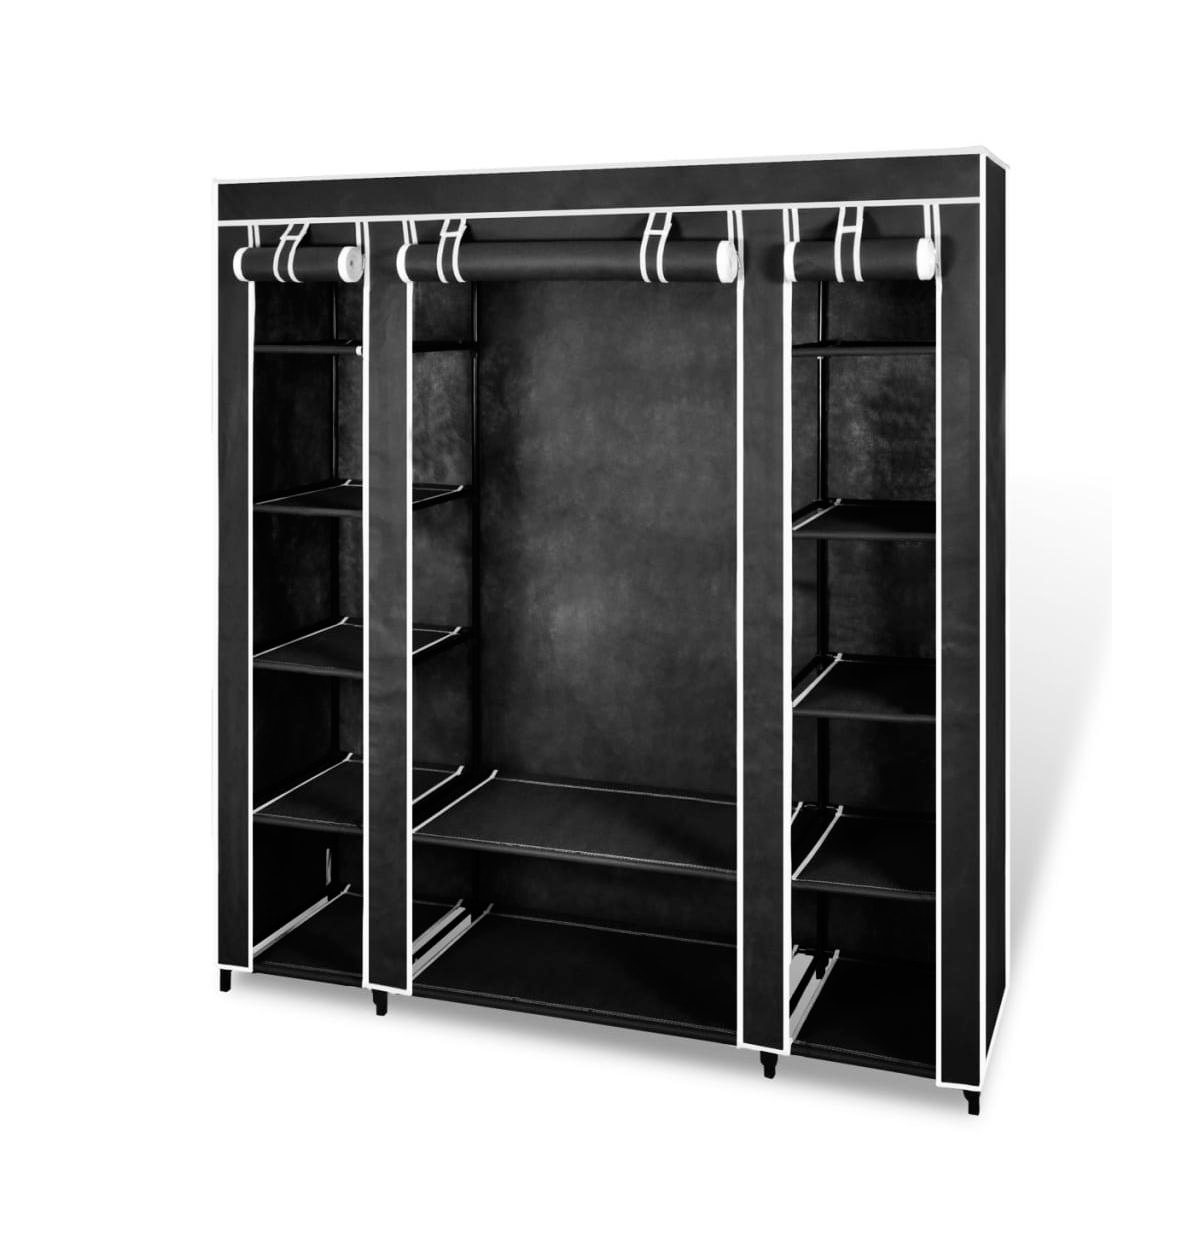 Fabric Wardrobe with Compartments and Rods 17.7"x59"x69" Black - Black